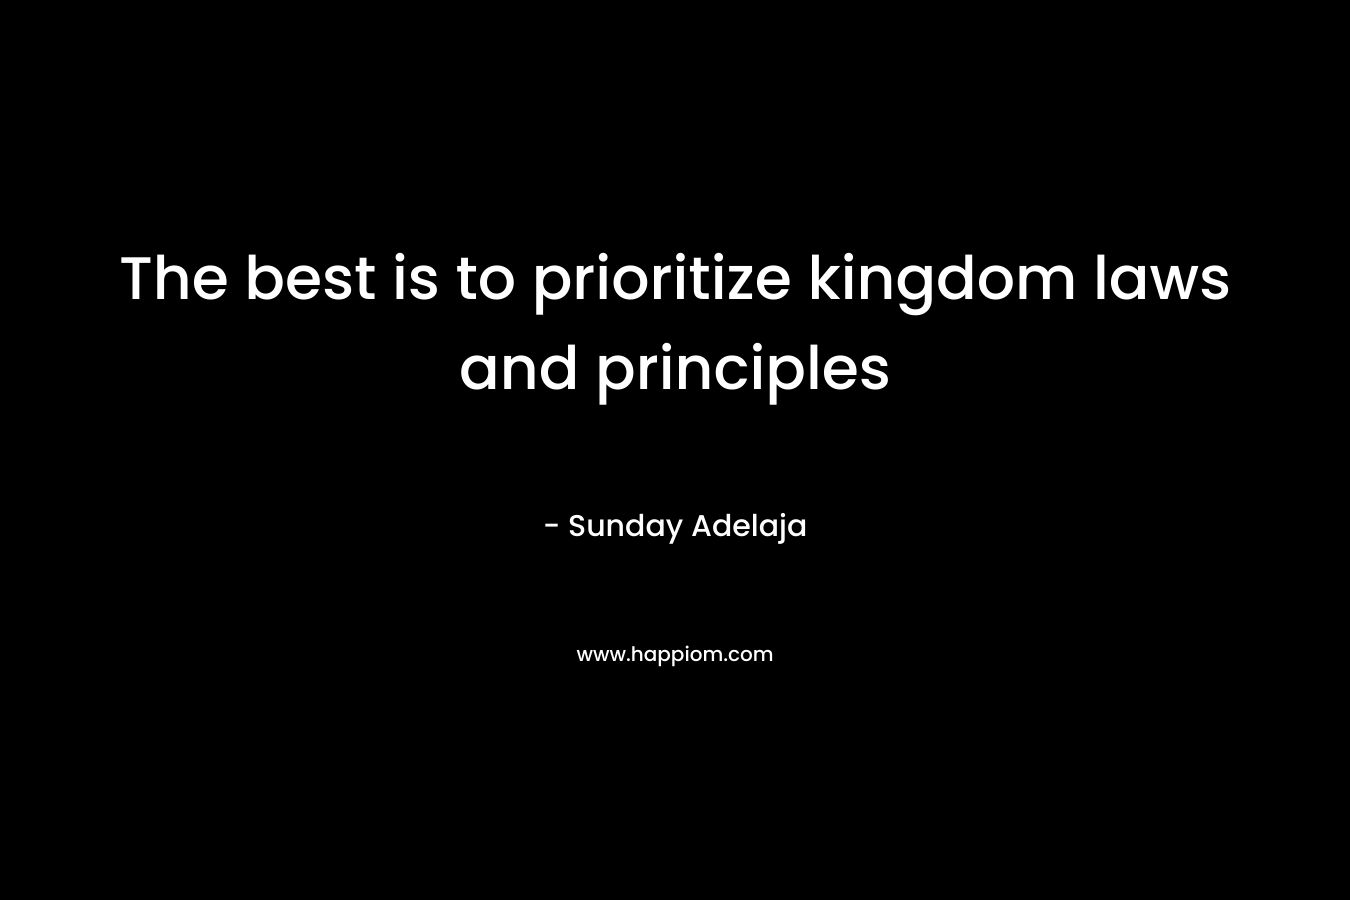 The best is to prioritize kingdom laws and principles